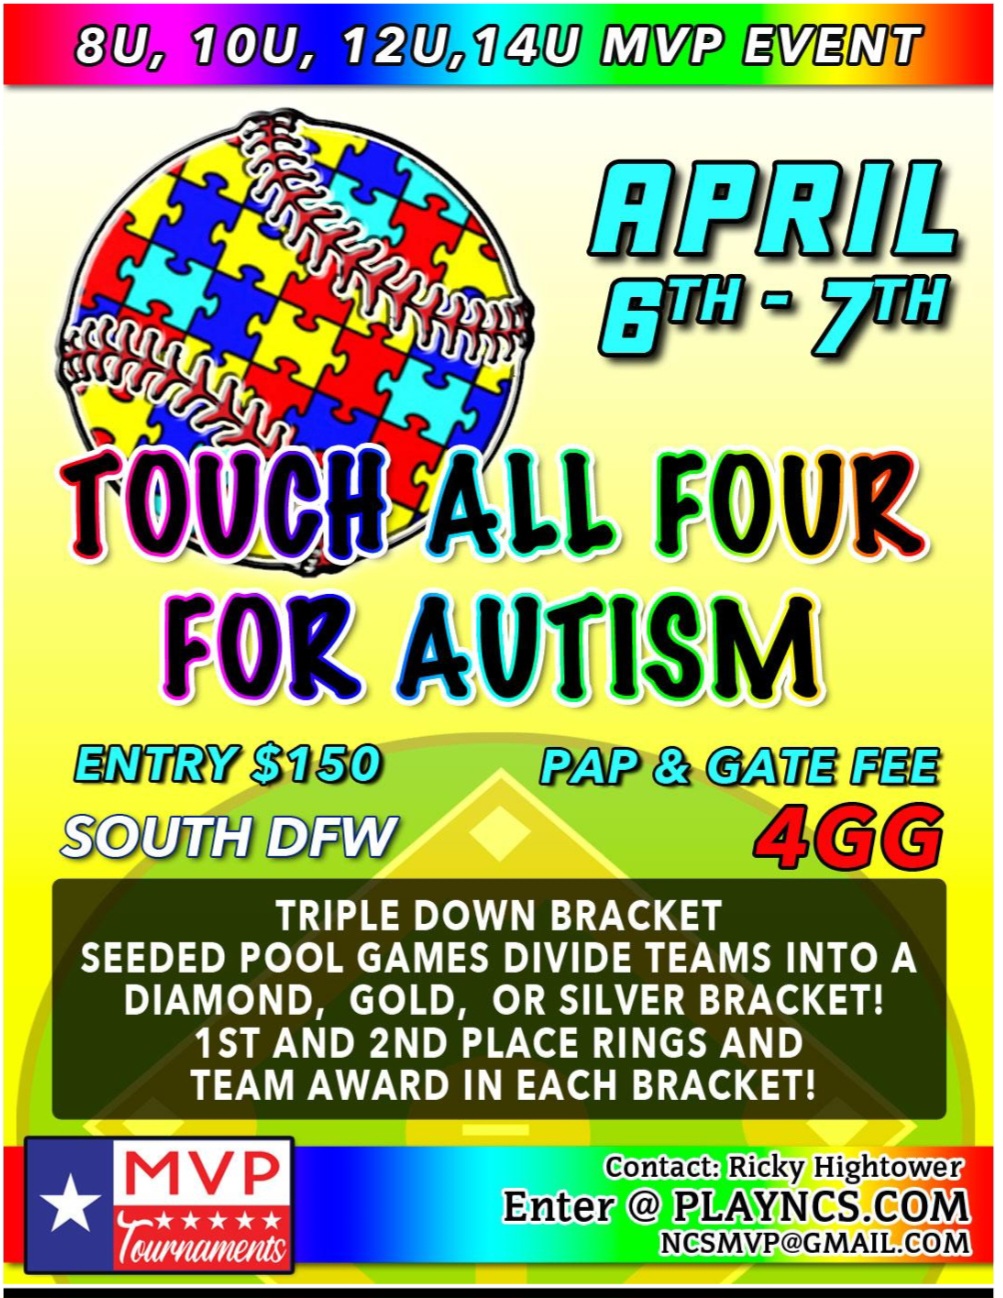 NCS 4TH ANNUAL TOUCH ALL FOUR FOR AUTISM MVP EVENT Logo